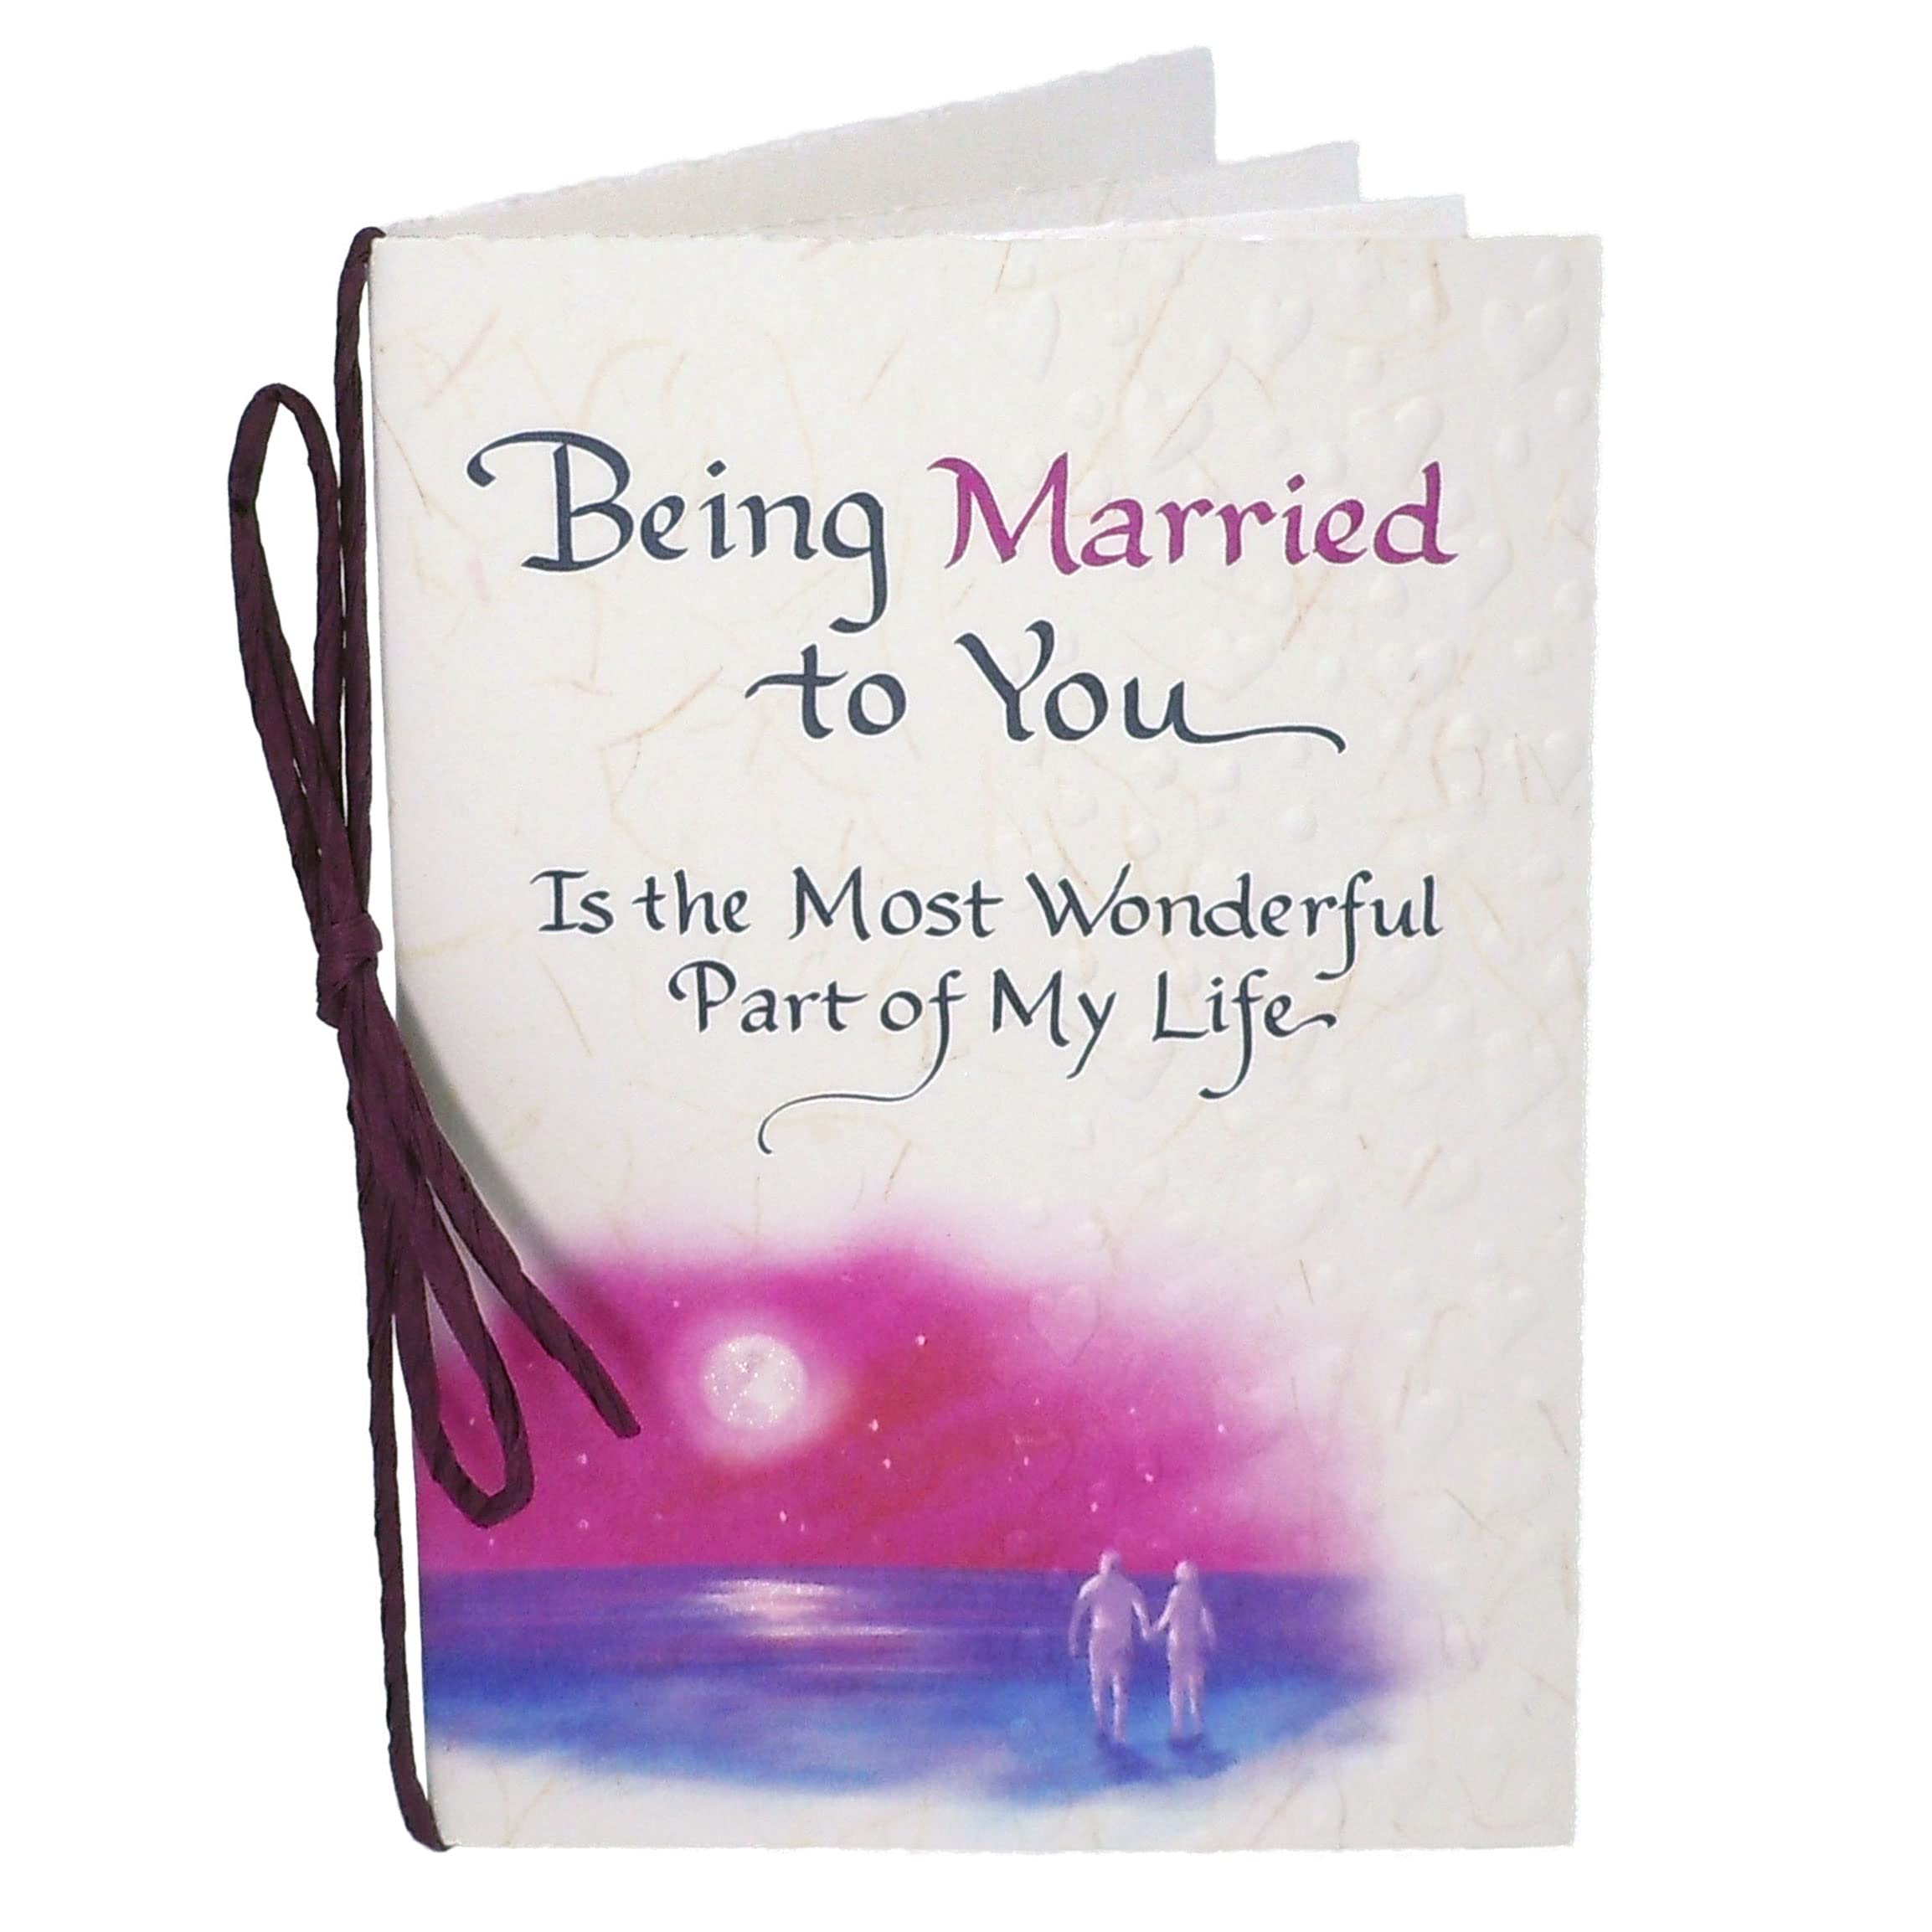 Blue Mountain Arts Marriage Card—Romantic and Loving Words for Your Husband or Wife (Being Married to You Is the Most Wonderful Part of My Life)